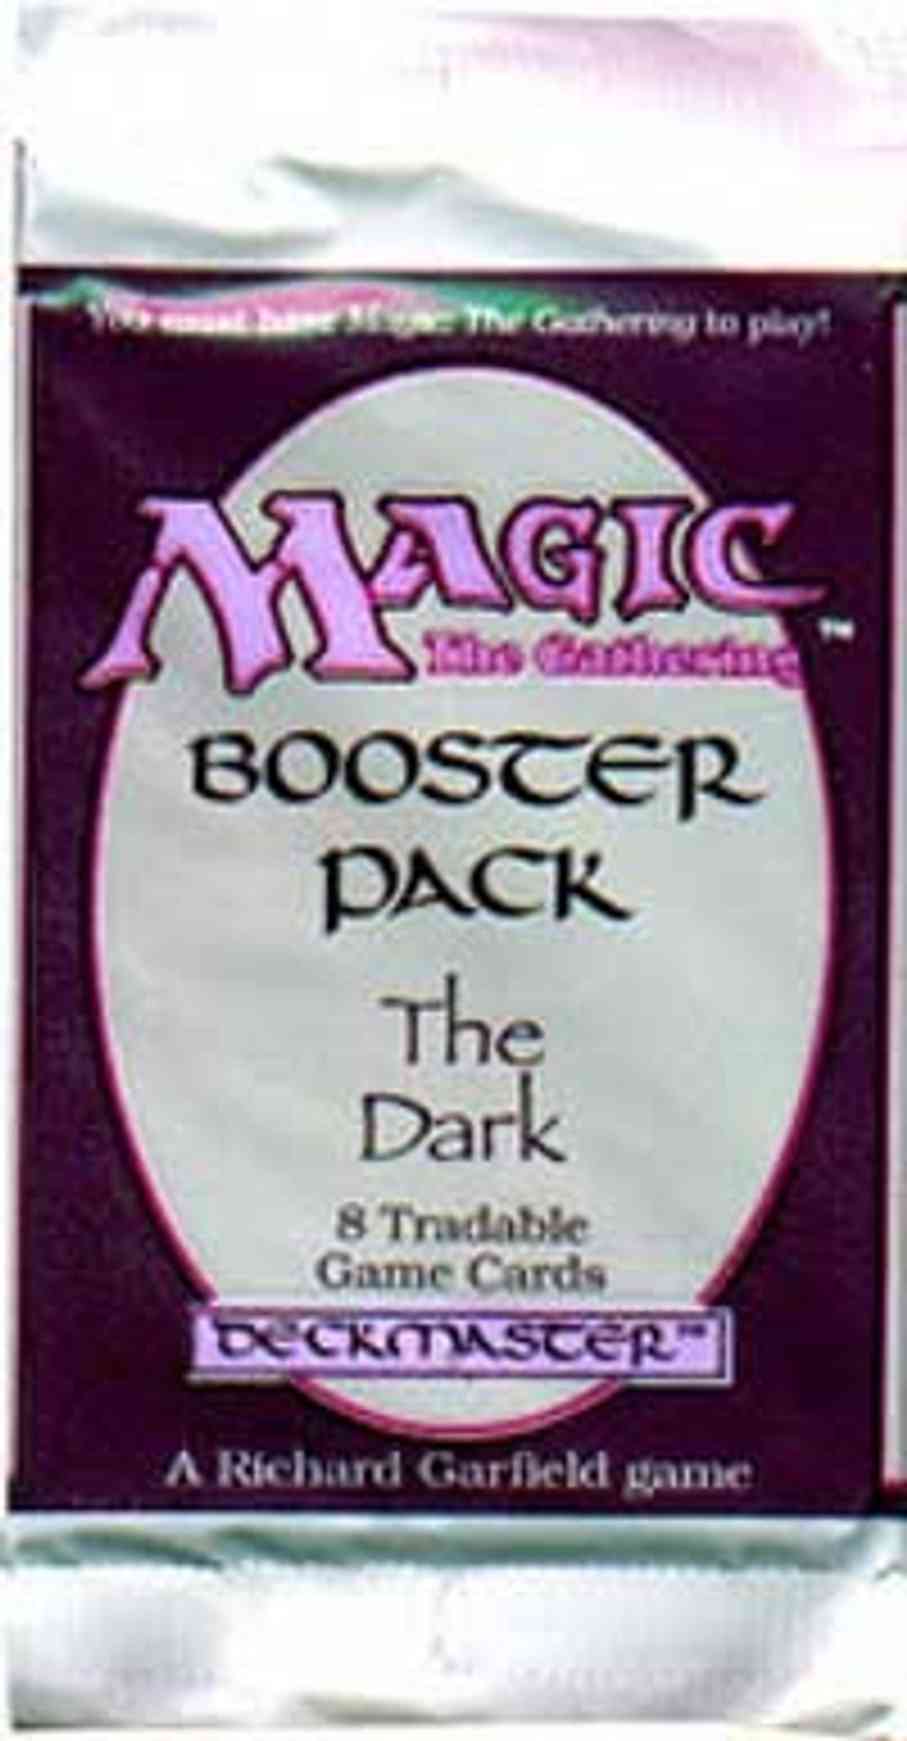 The Dark - Booster Pack magic card front